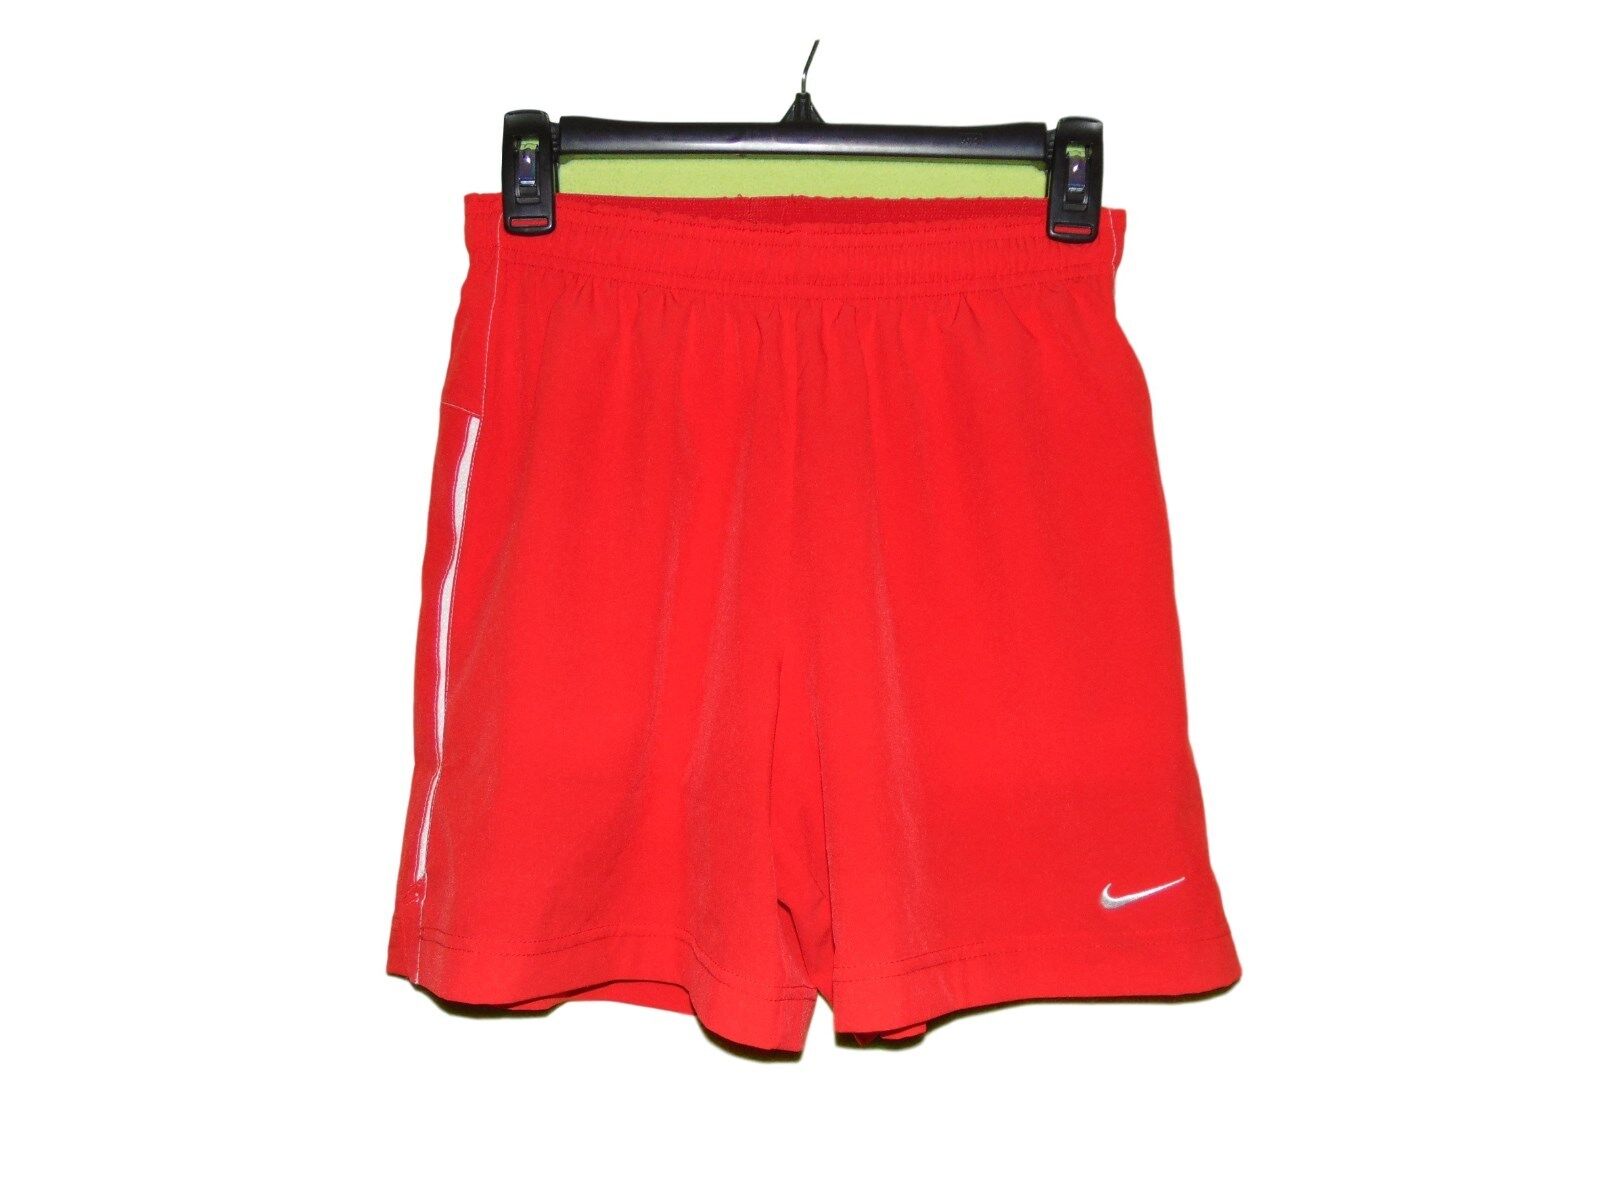 Nike Red Swimsuit Trunk New arrival Boys Size 25% OFF Large